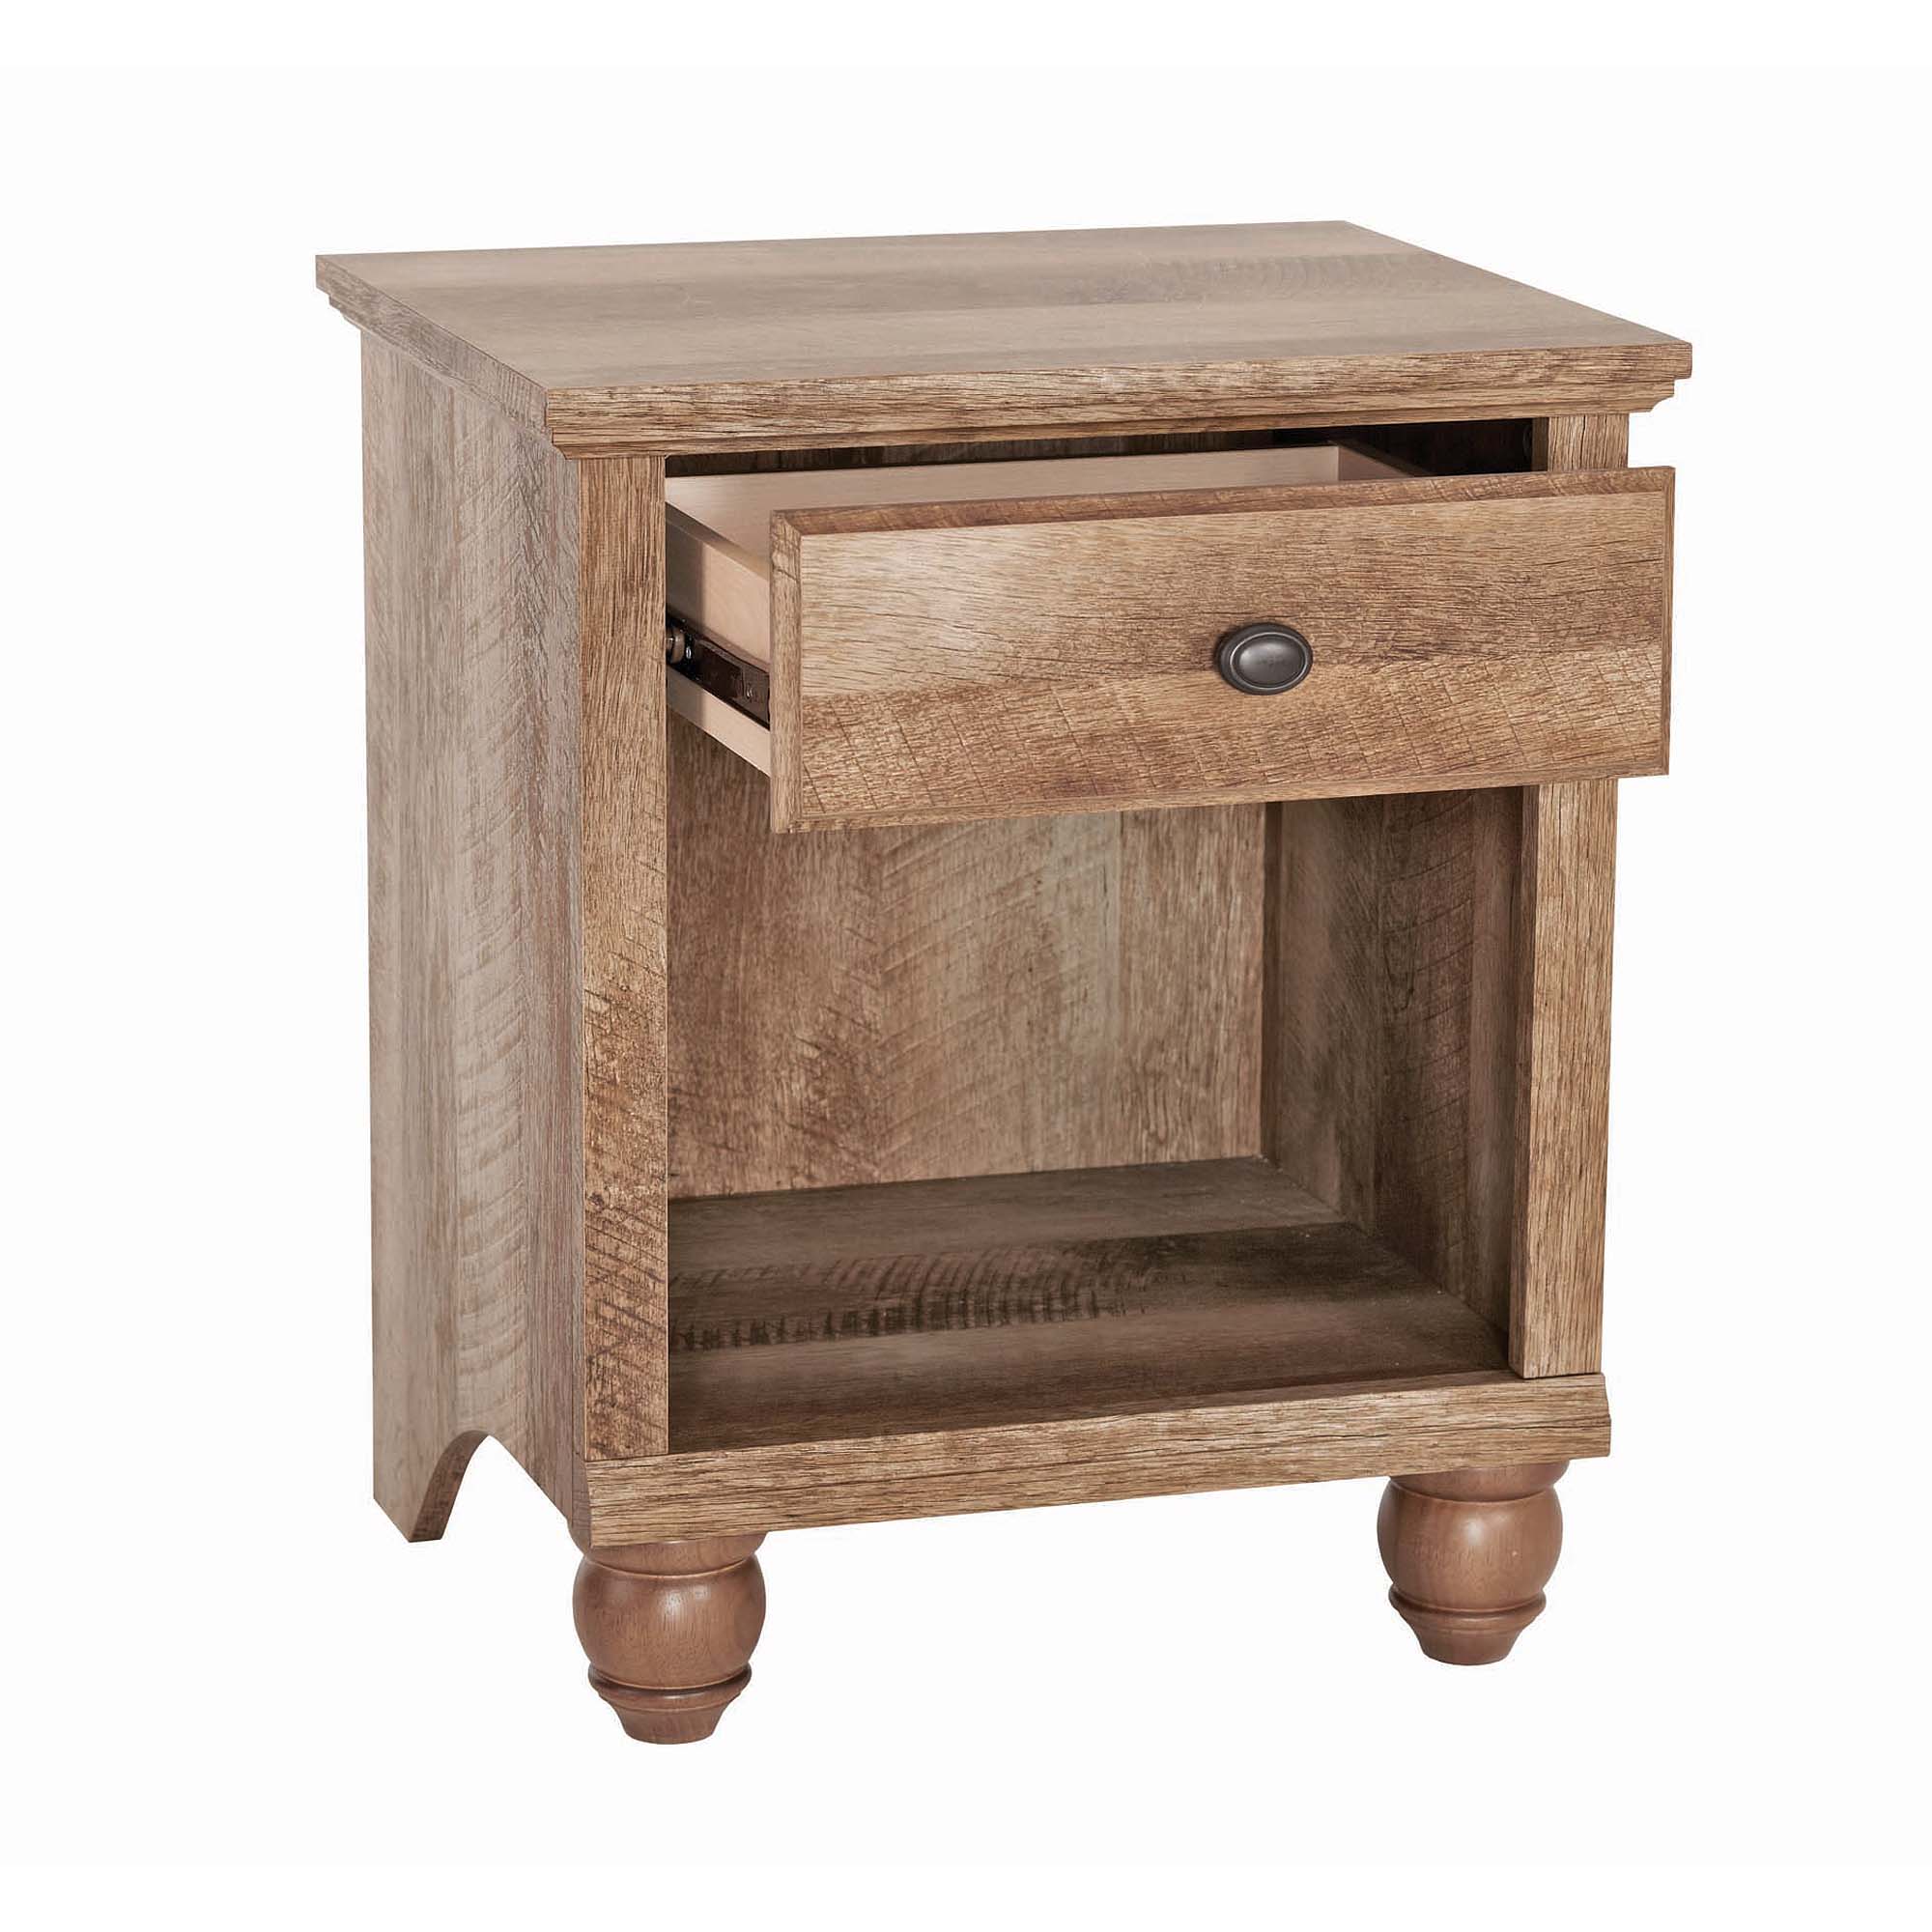 Better Homes & Gardens Crossmill Accent Table, Weathered Finish - image 2 of 8